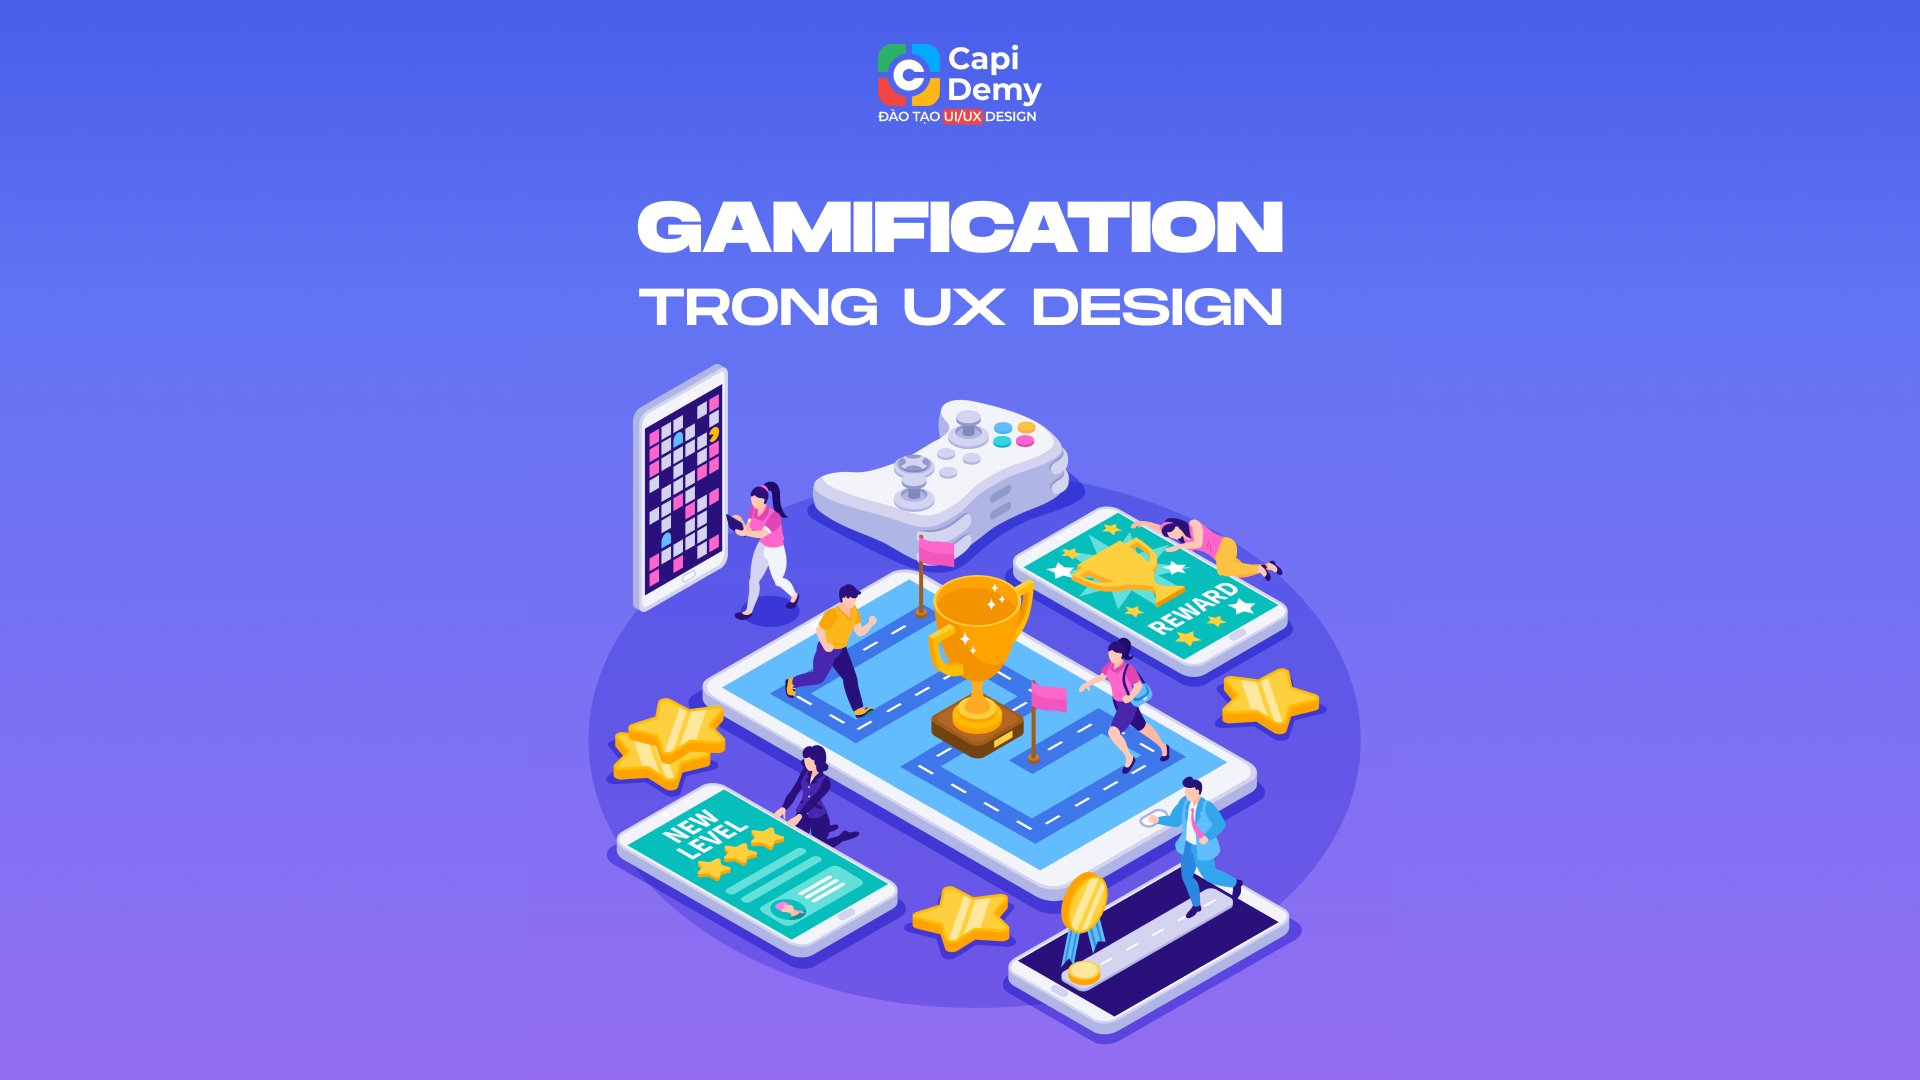 gamification-trong-ux-design